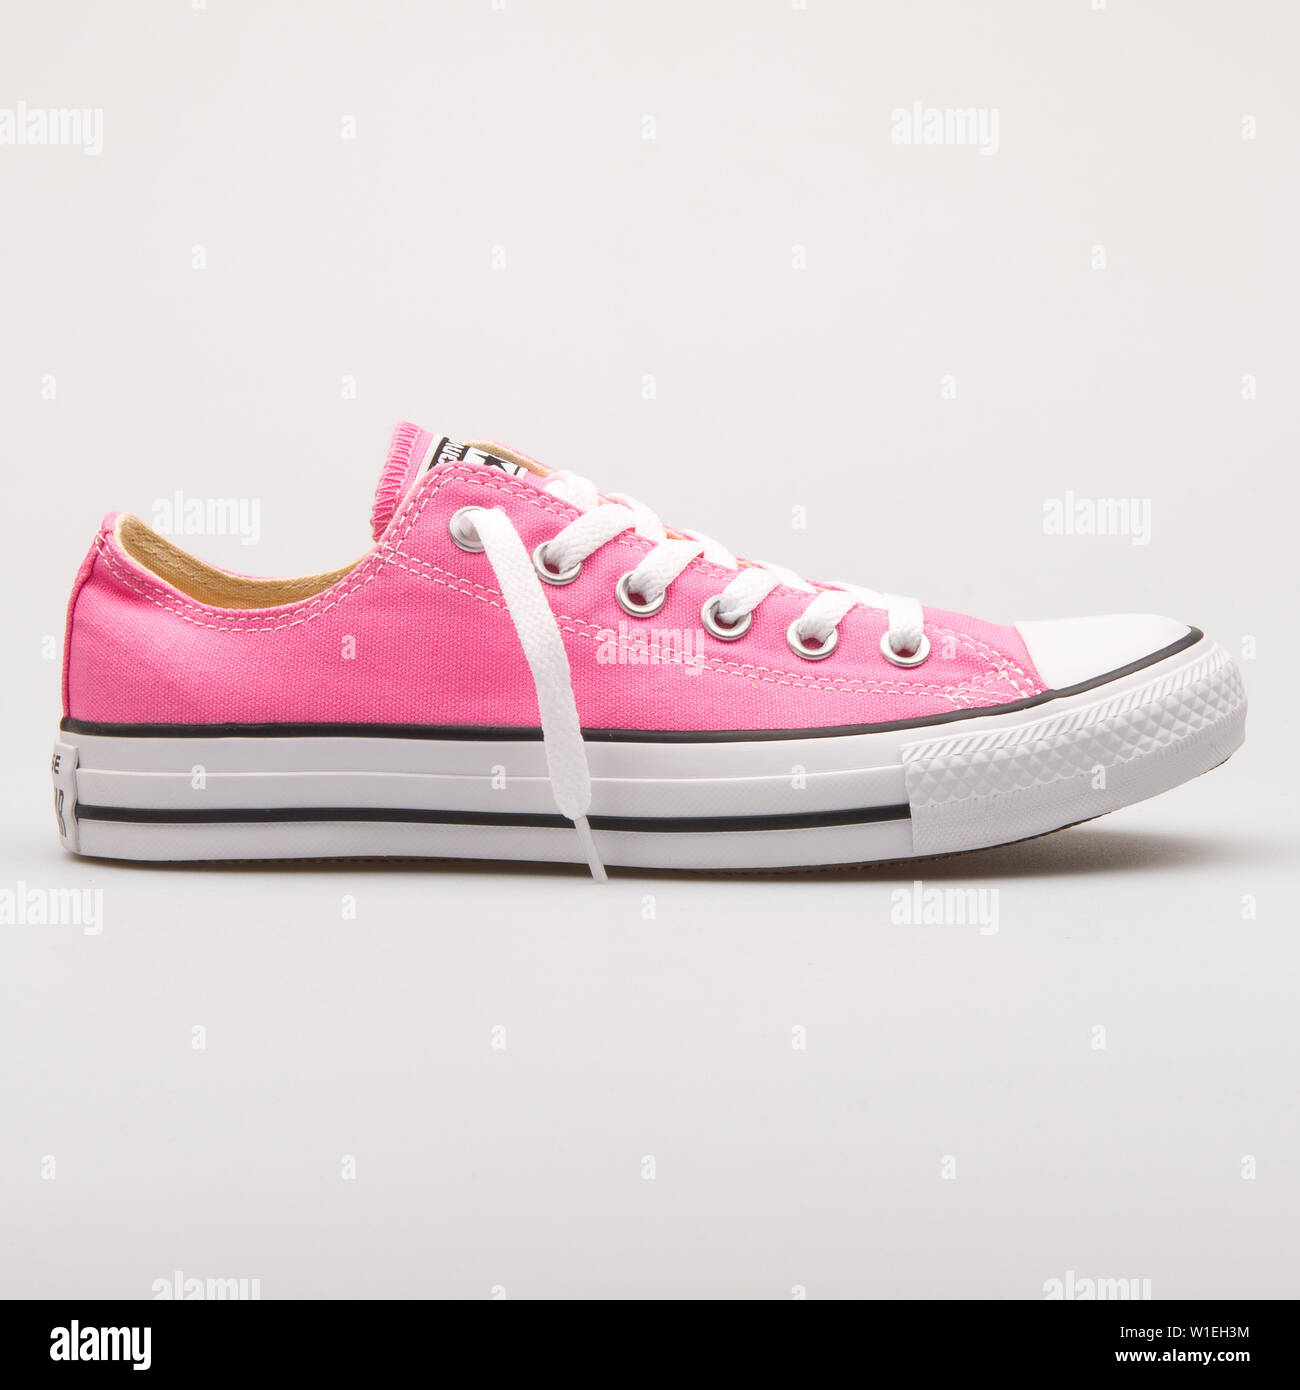 VIENNA, AUSTRIA - AUGUST 23, 2017: Converse Chuck Taylor All Star OX pink  sneaker on white background Stock Photo - Alamy